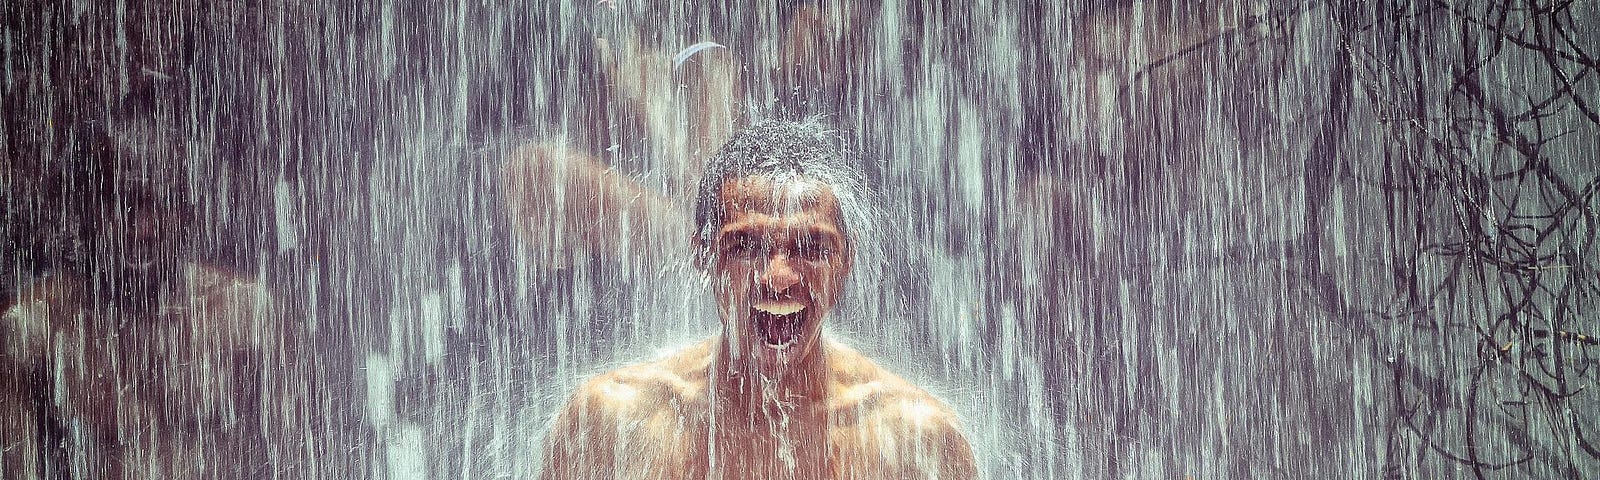 A man with no shirt is up to his waist in water while heavy rain pours over him. He is smiling.